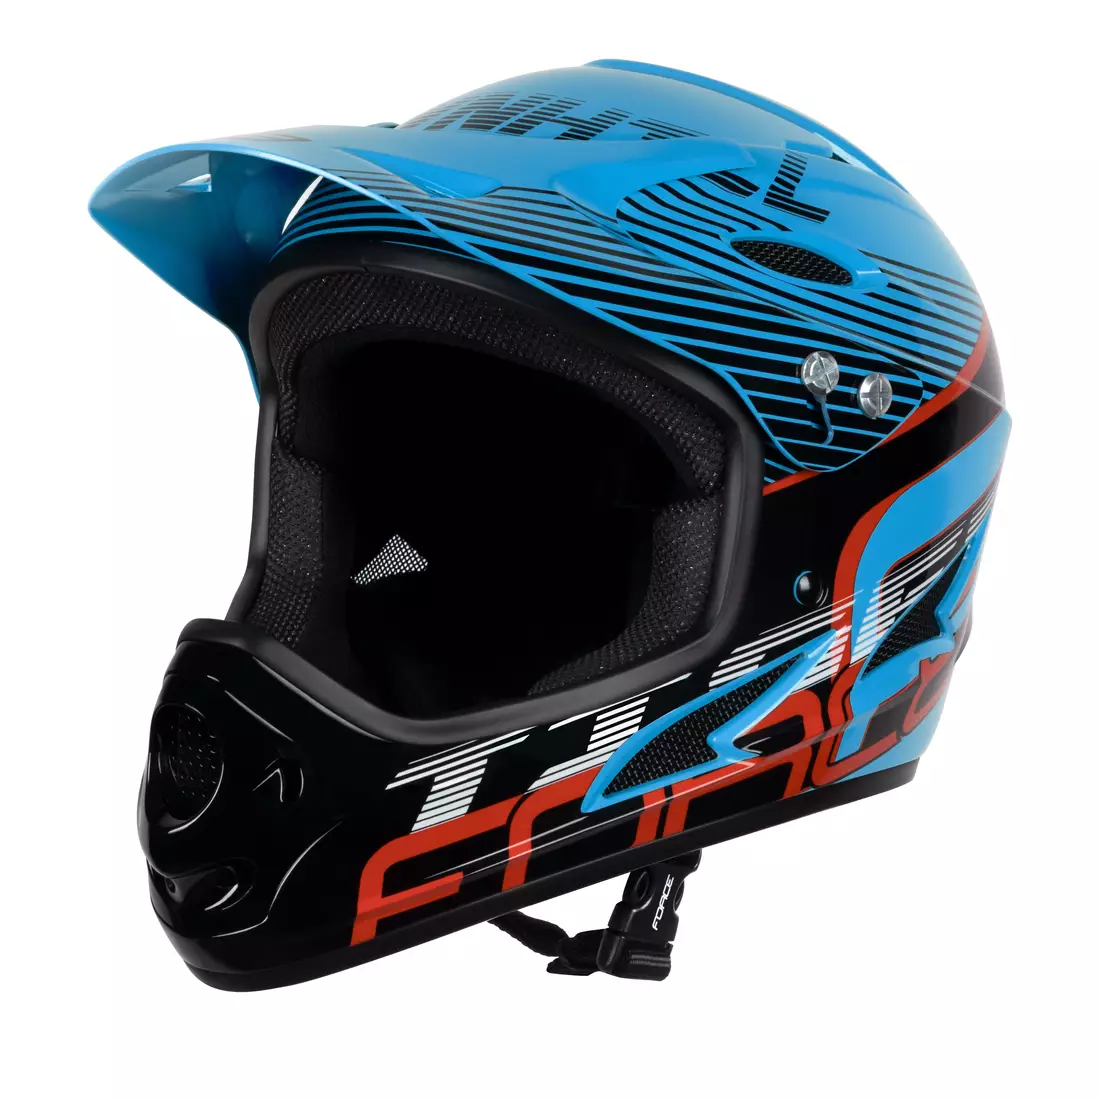 FORCE bicycle helmet TIGER downhill, blue-black-red 902106